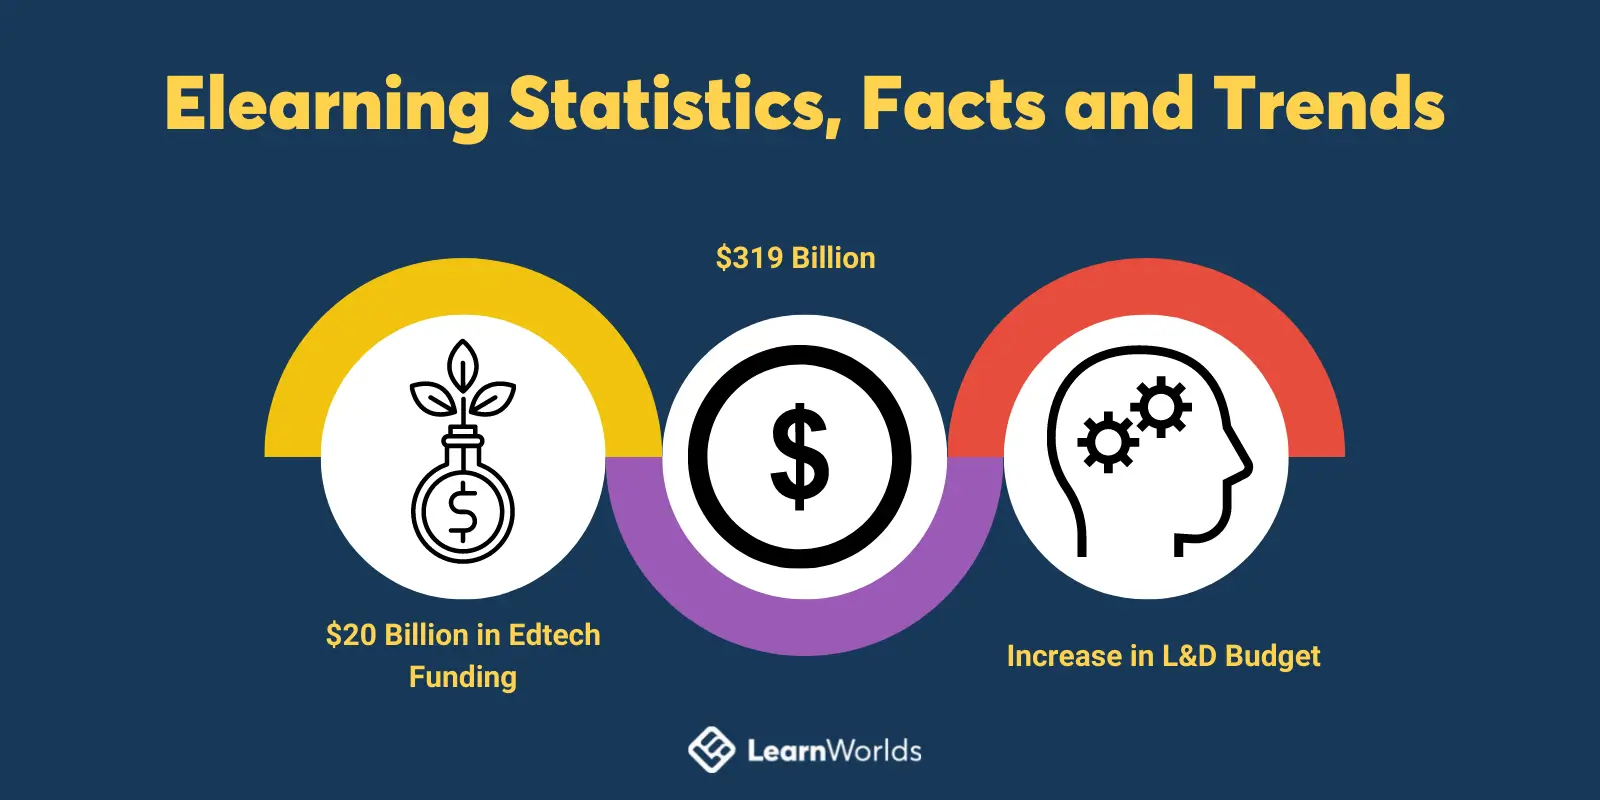 100+ Elearning Statistics, Facts and Trends